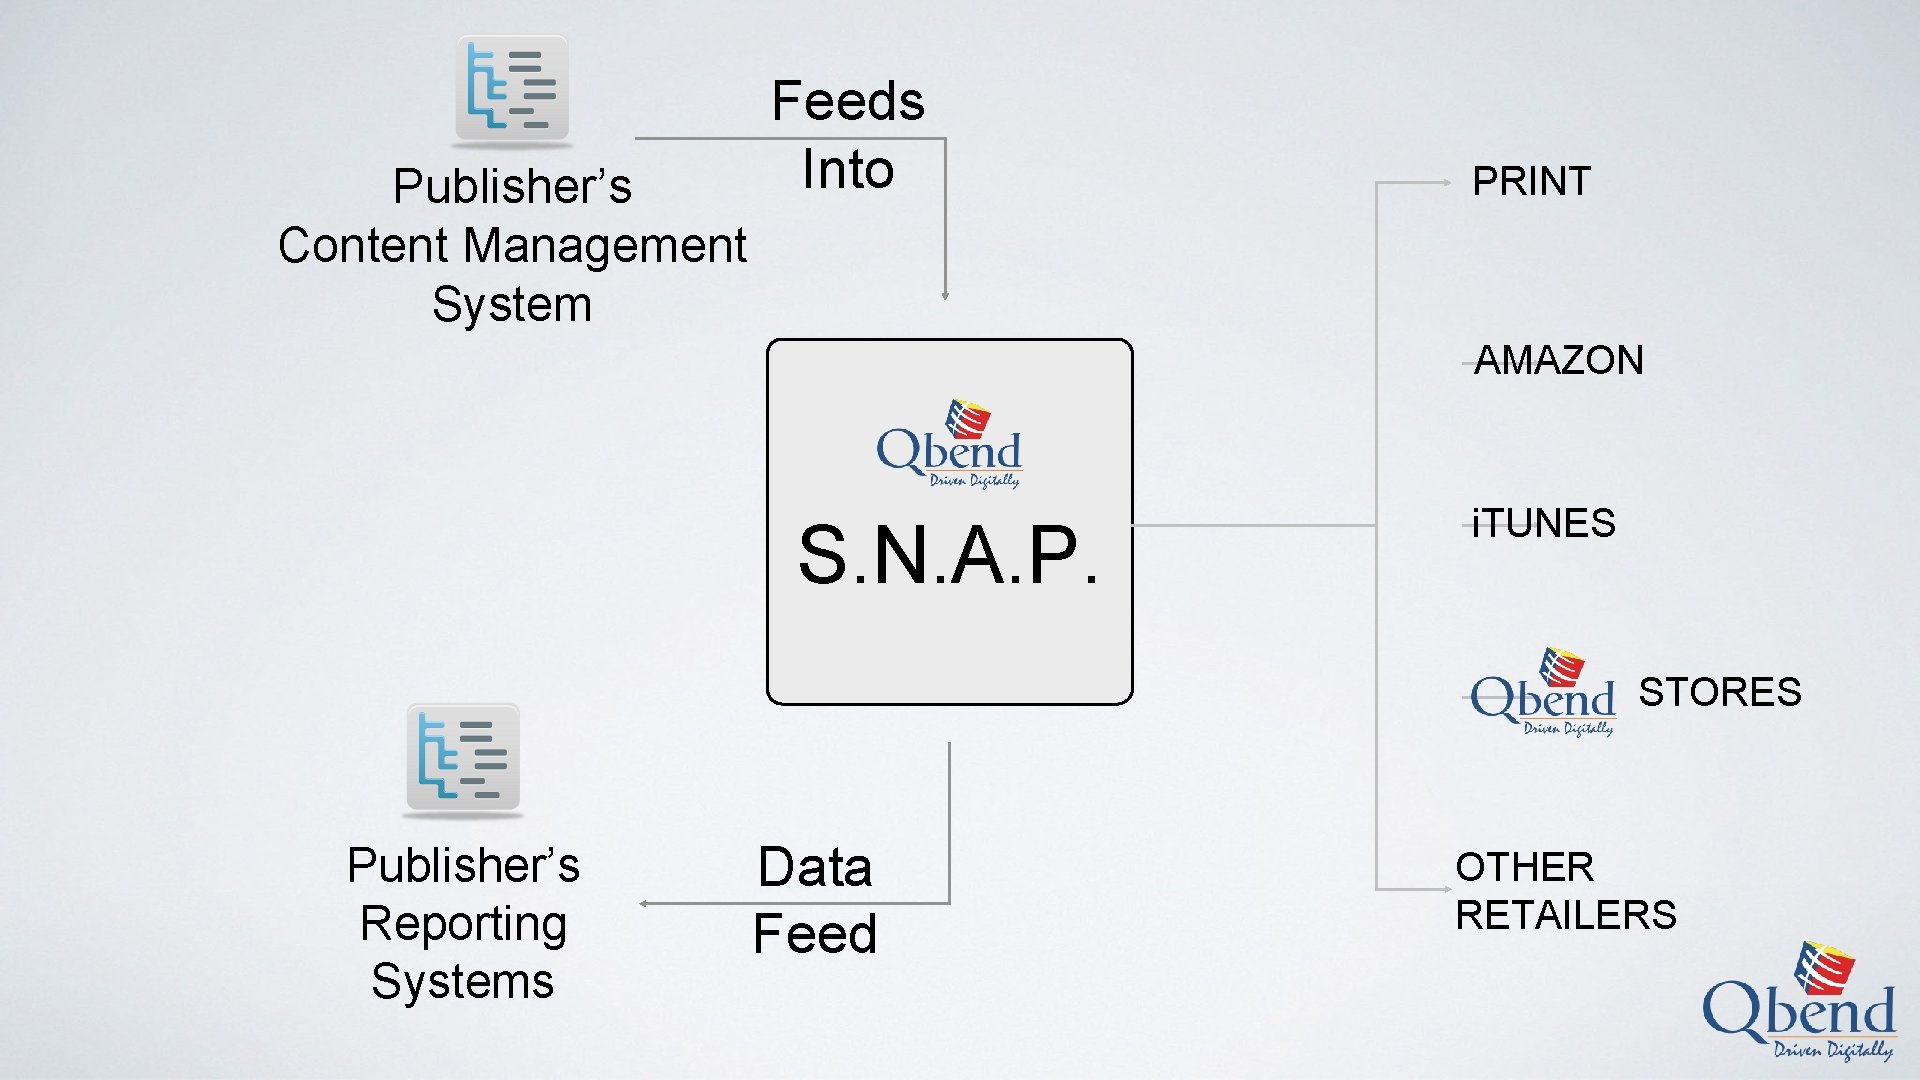 Publisher’s Content Management System Feeds Into PRINT AMAZON S. N. A. P. i. TUNES